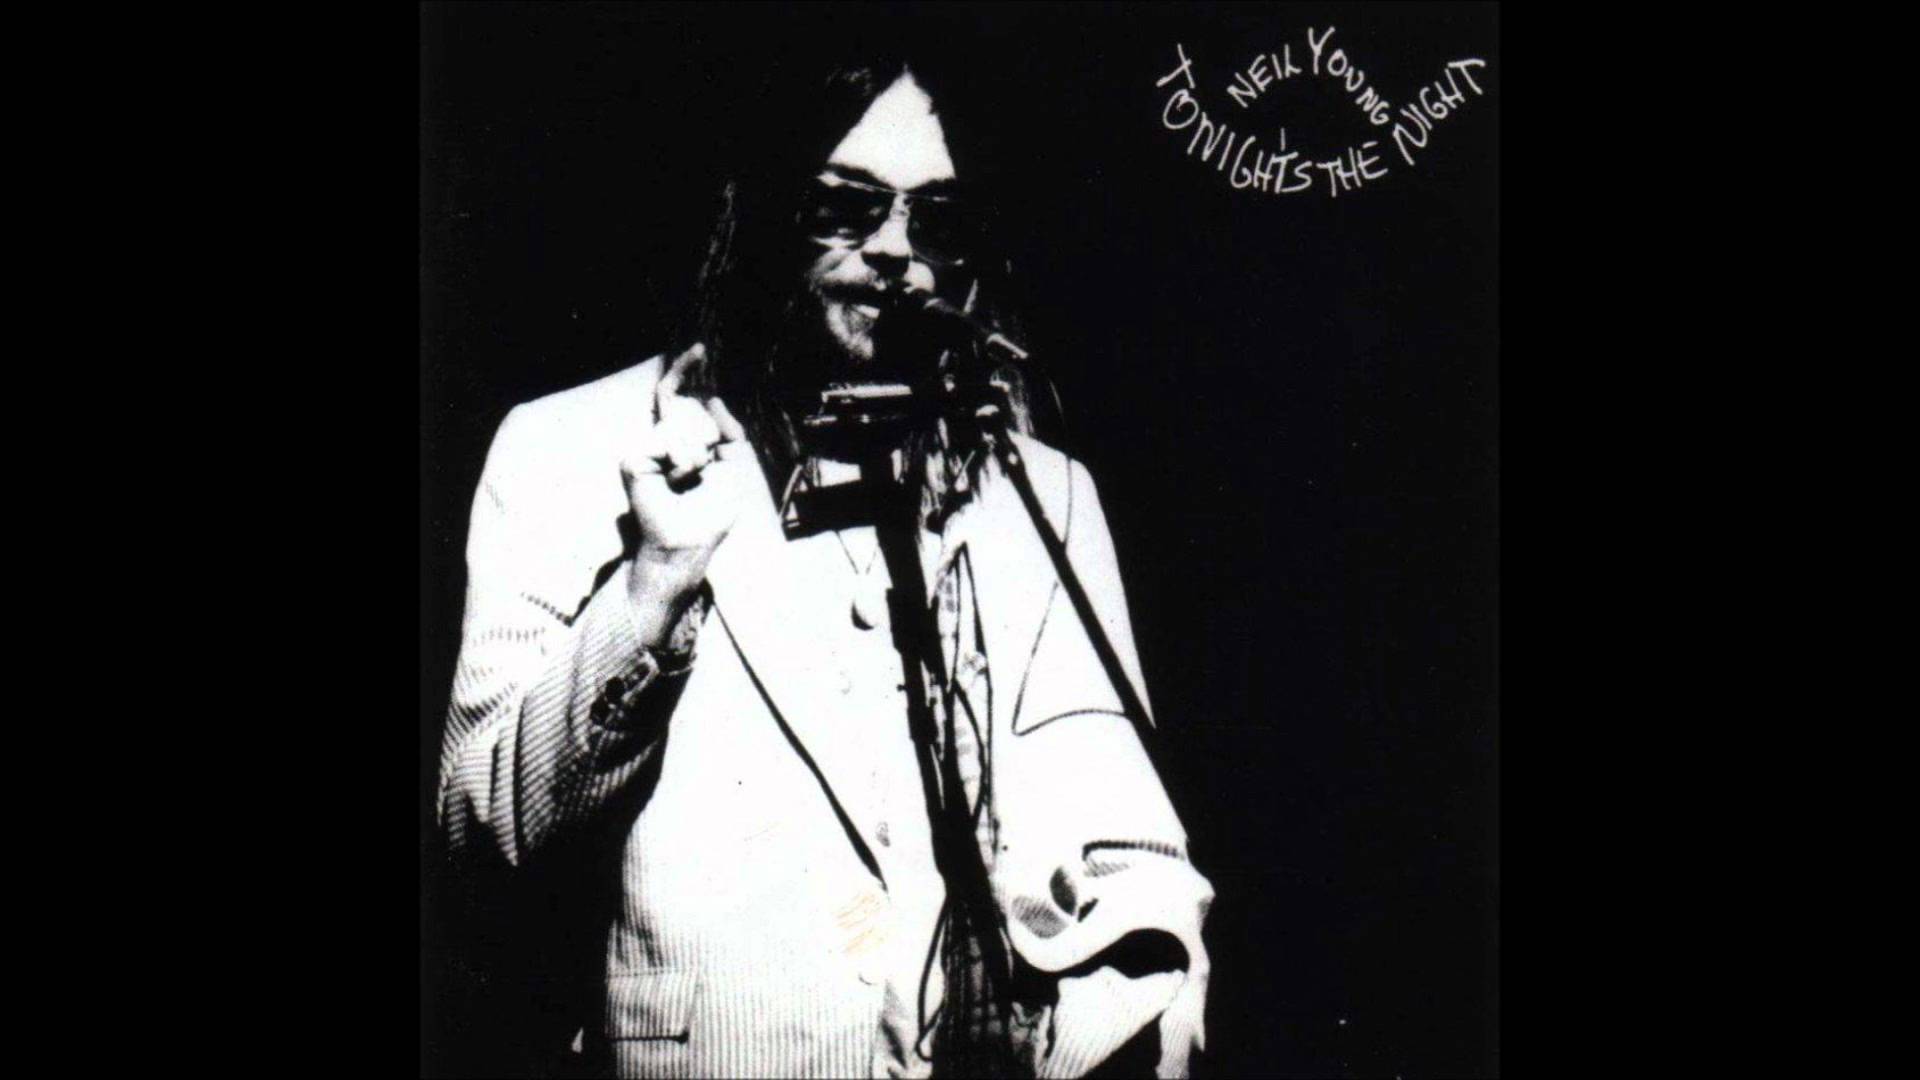 Neil Young - Tonight's the Night [1975] - 08 - Albuquerque - YouTube